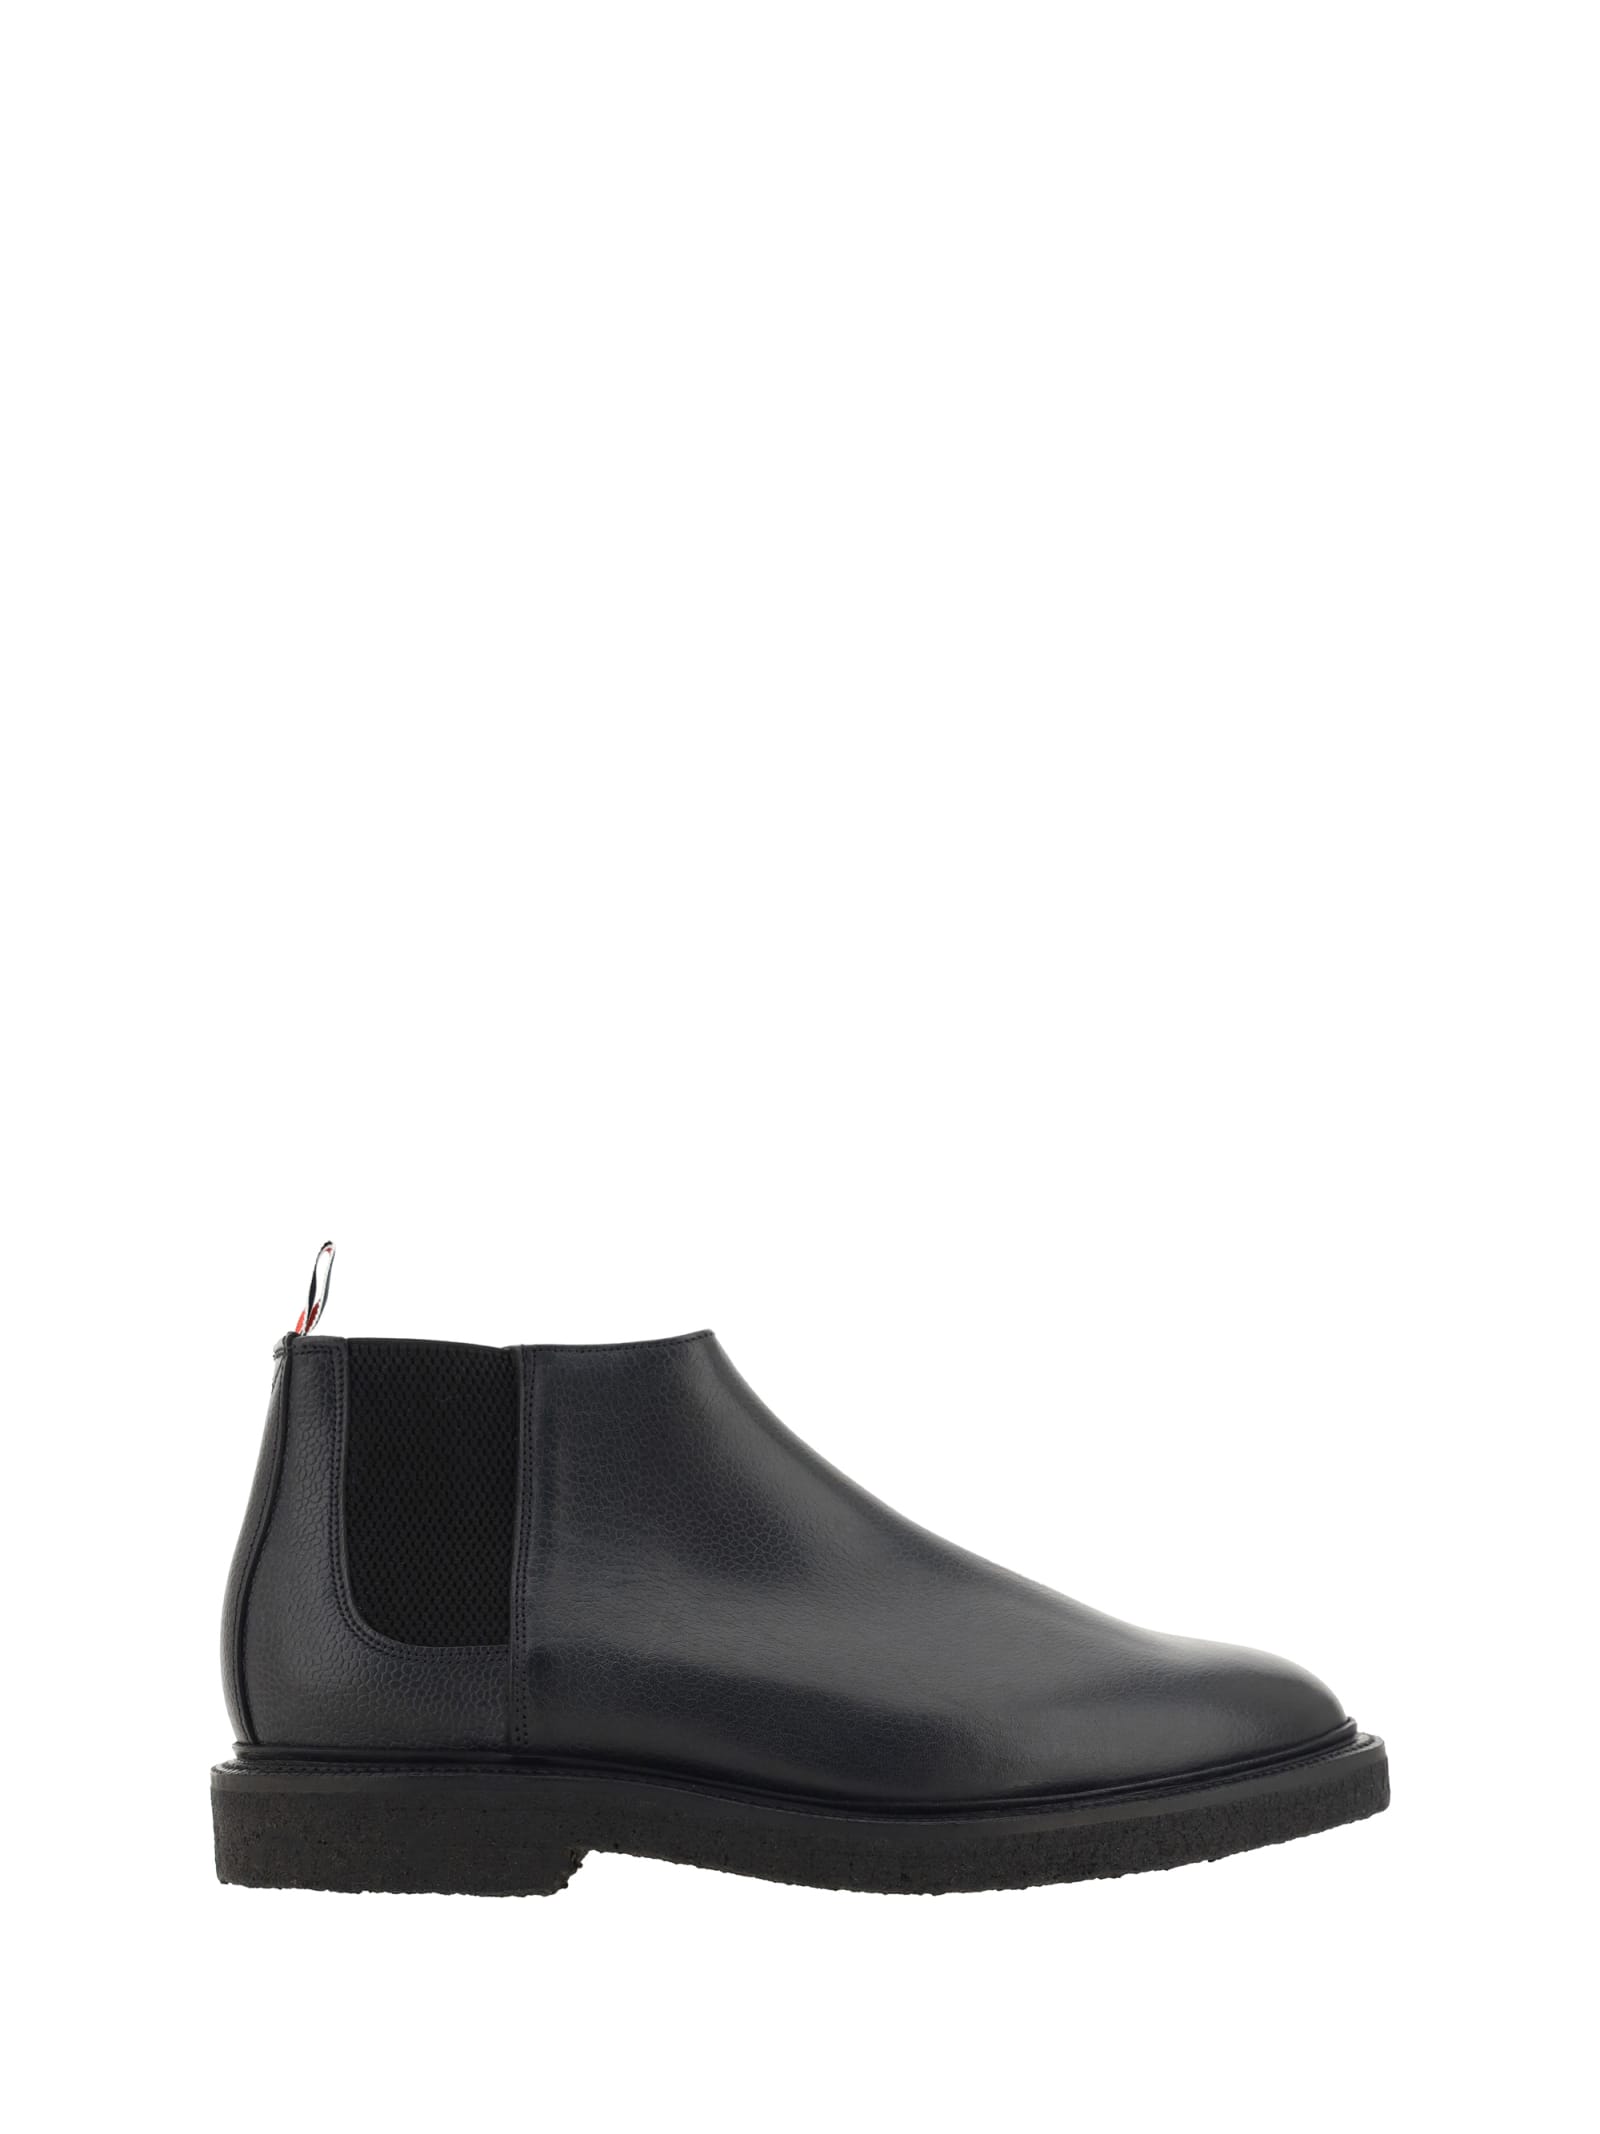 THOM BROWNE ANKLE BOOTS